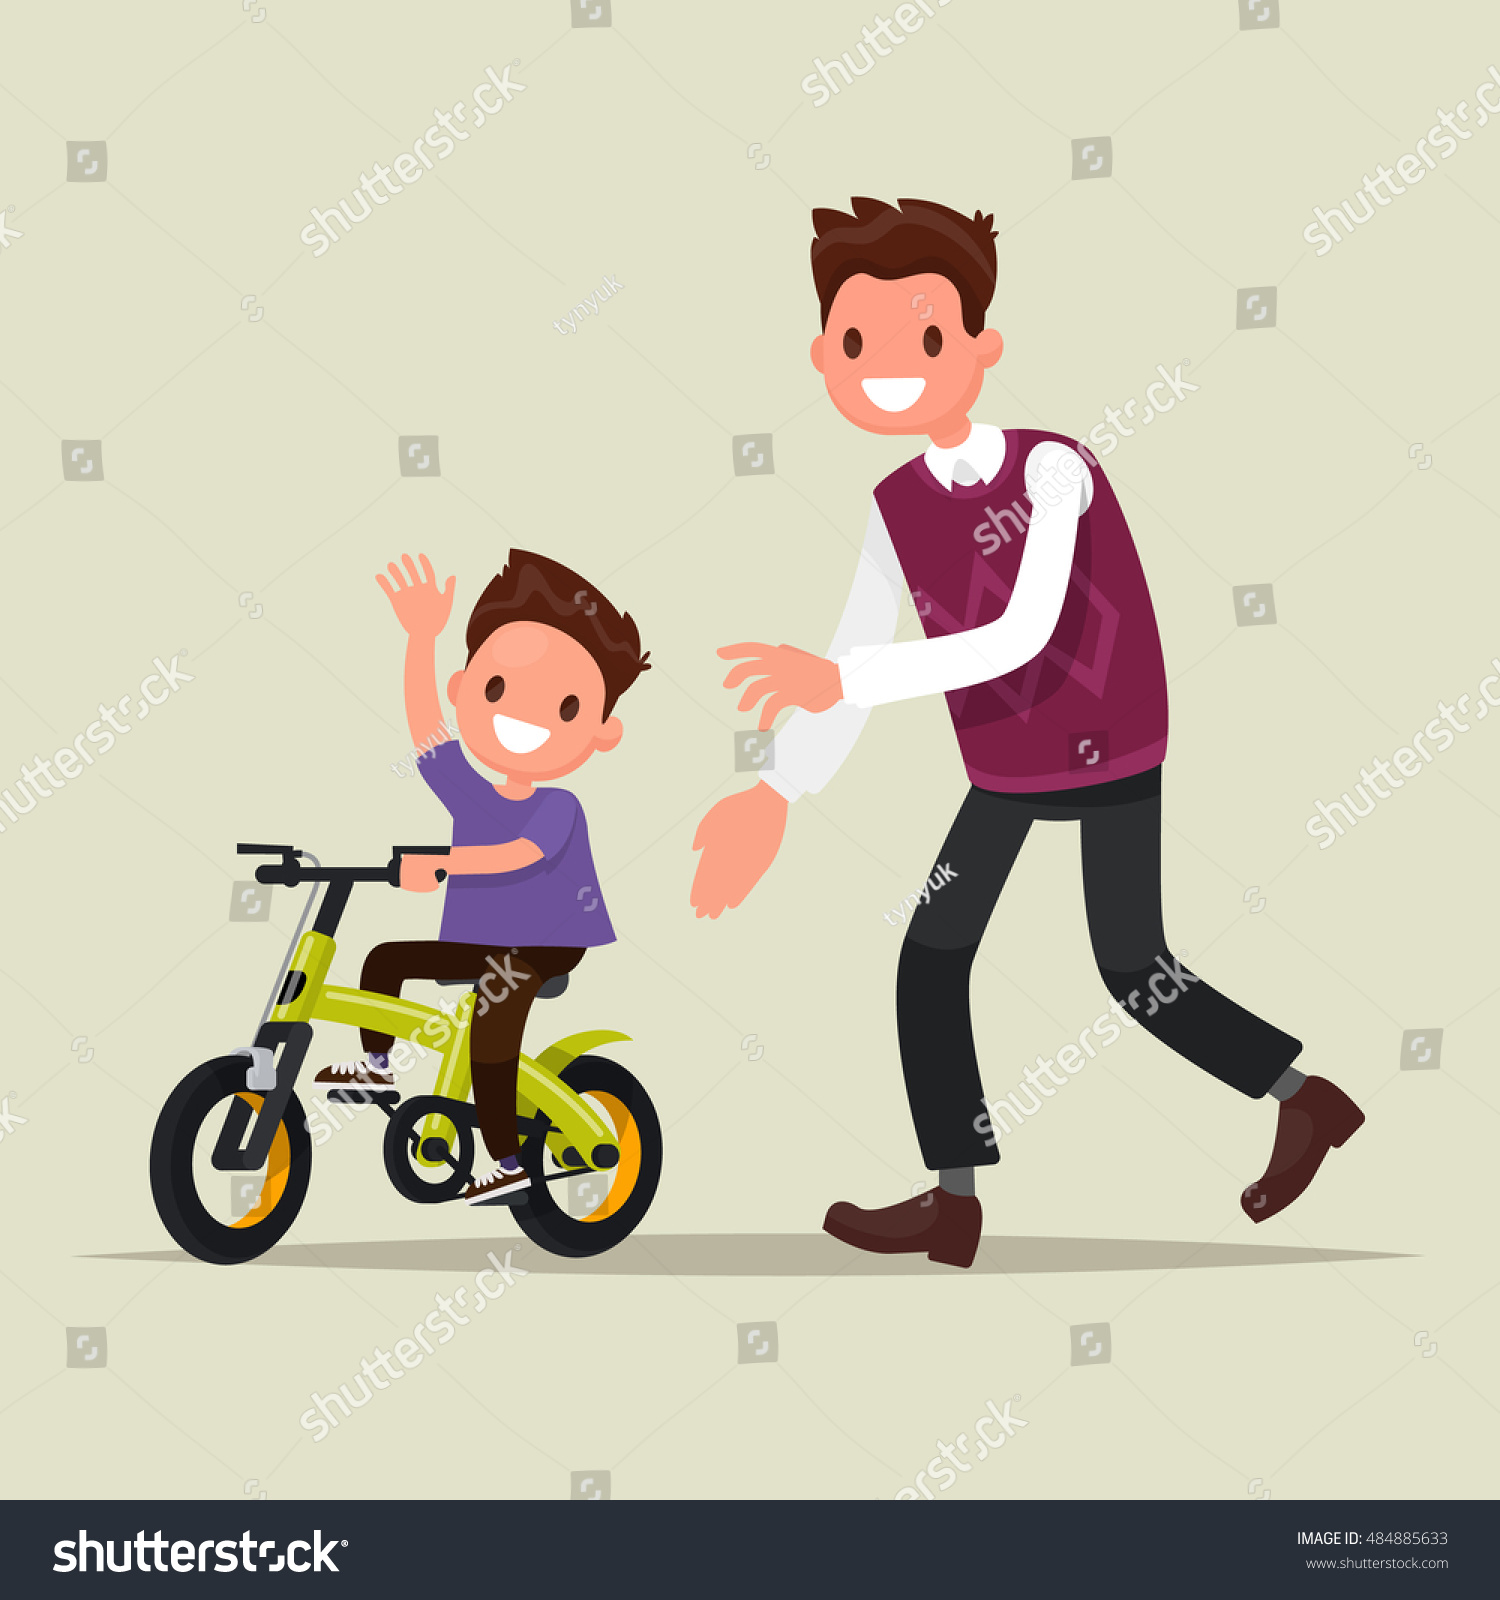 Download Parenting Father Teaches His Son Ride Stock Vector 484885633 - Shutterstock